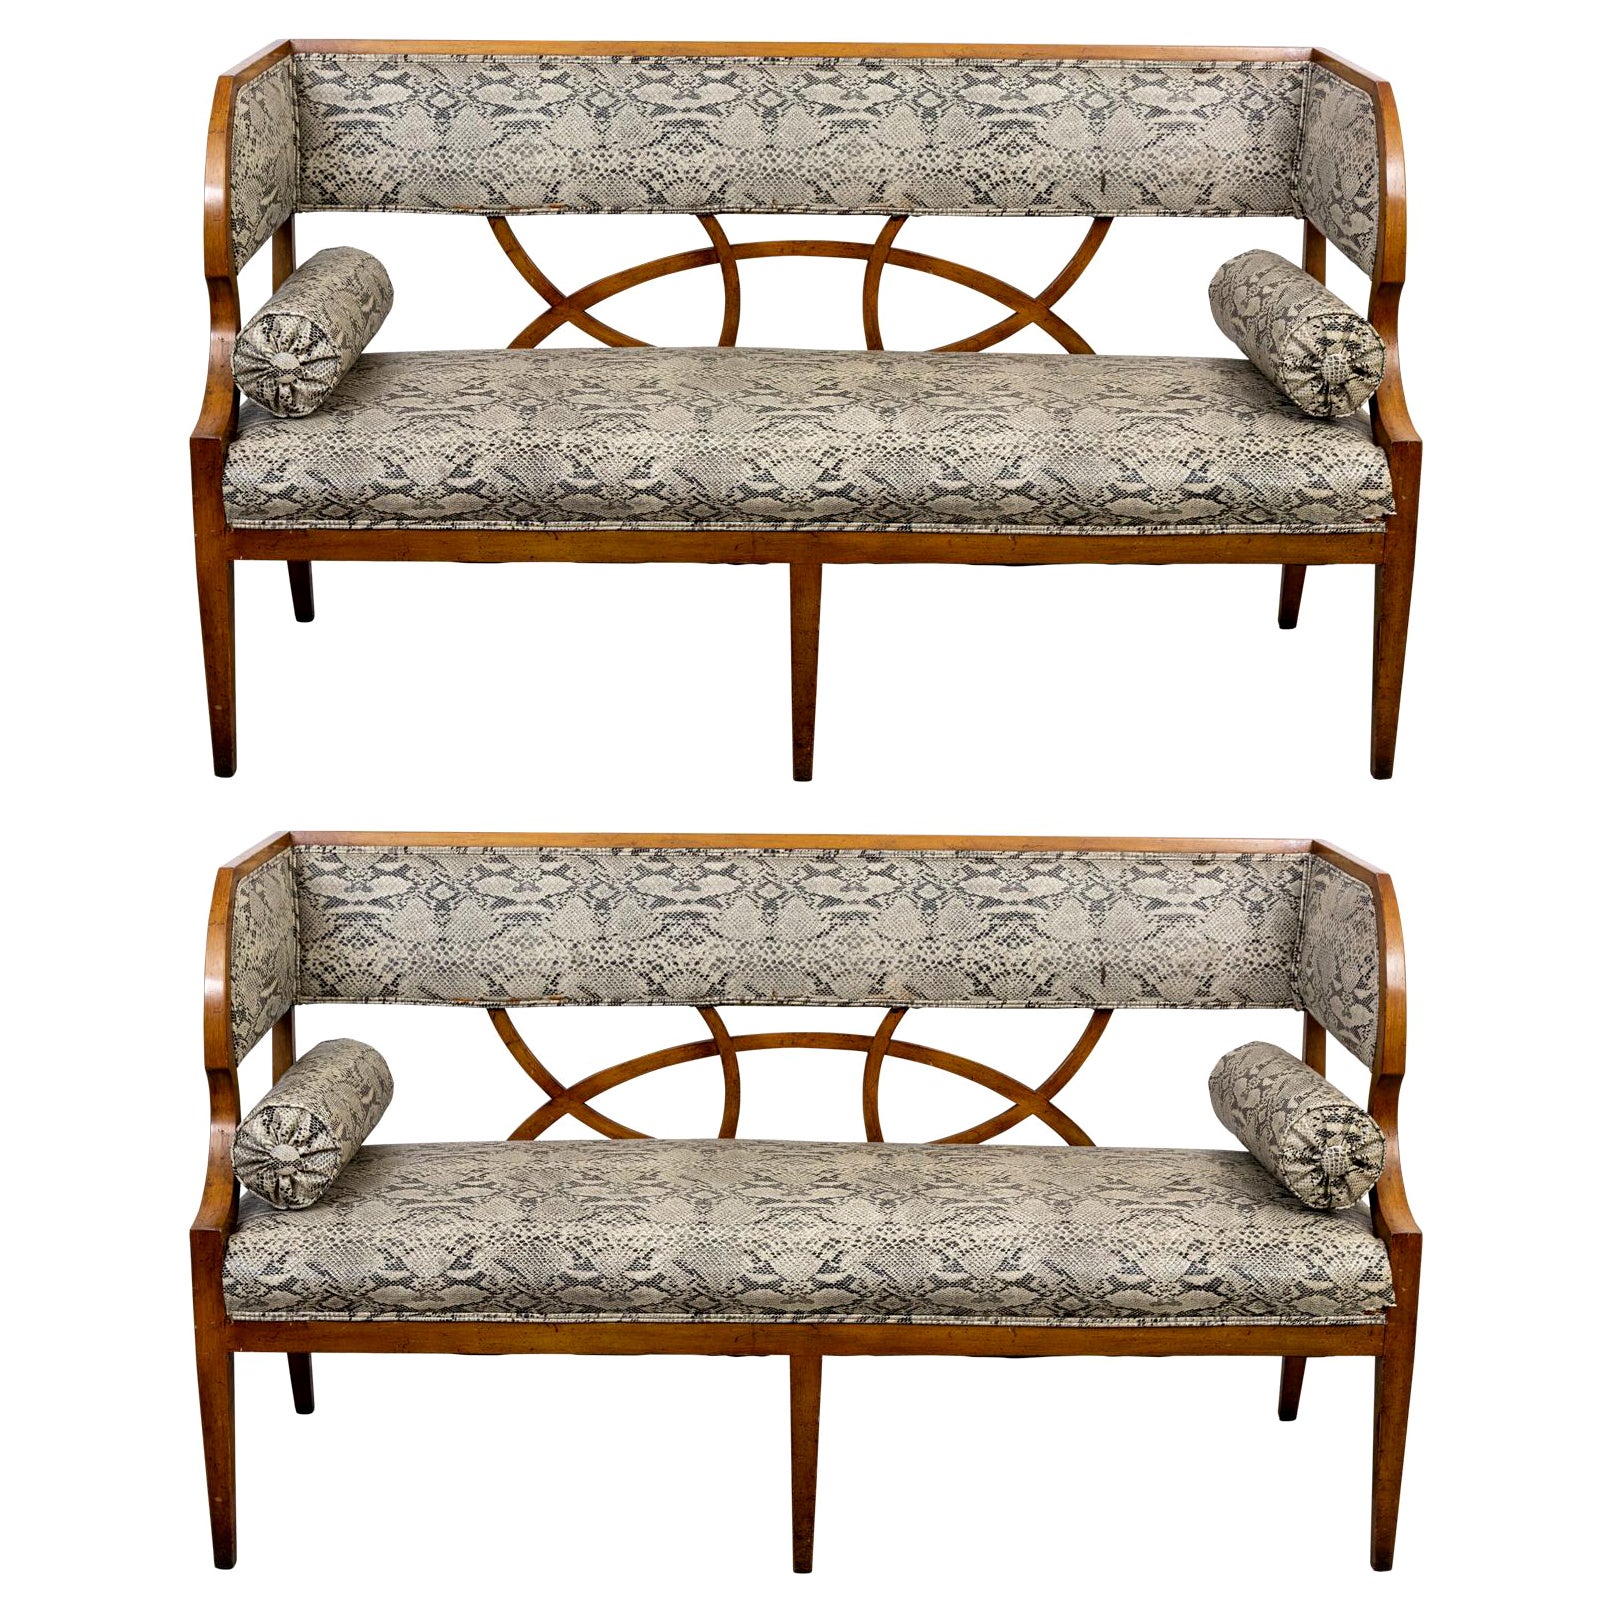 Pair of Highly Stylized Settees